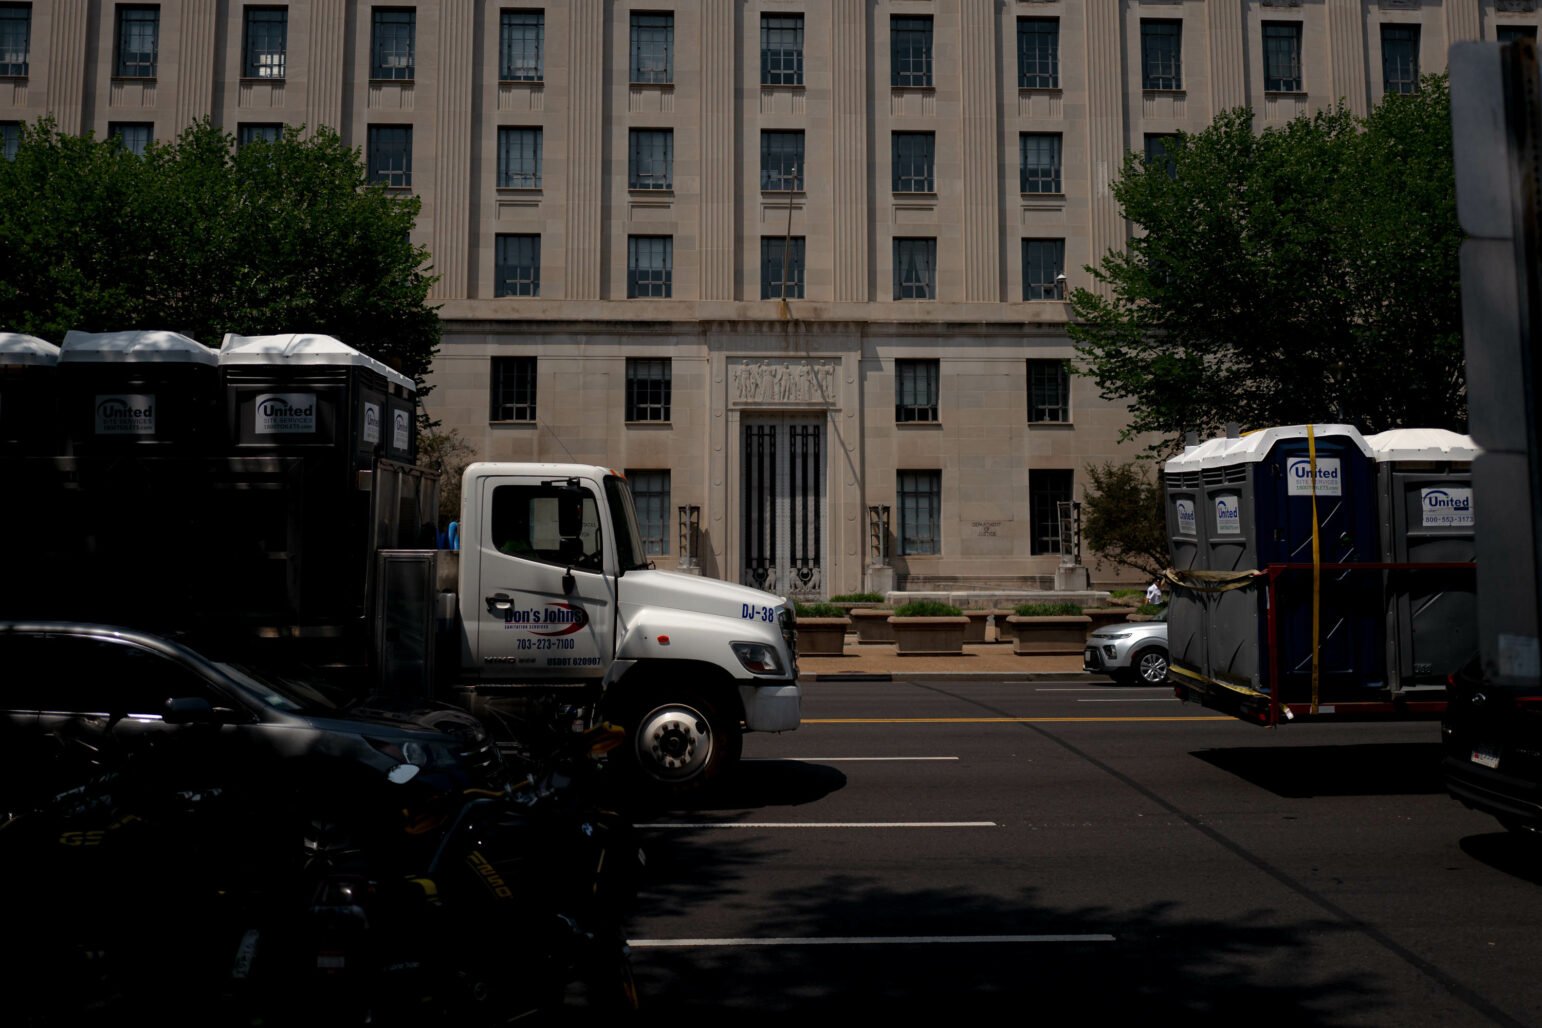 A truck labeled 'Don's Johns' parked on the street in front of the Robert F. Kennedy Department of Justice Building. The truck is carrying portable toilets. The building's facade is visible in the background with trees on either side of the street.